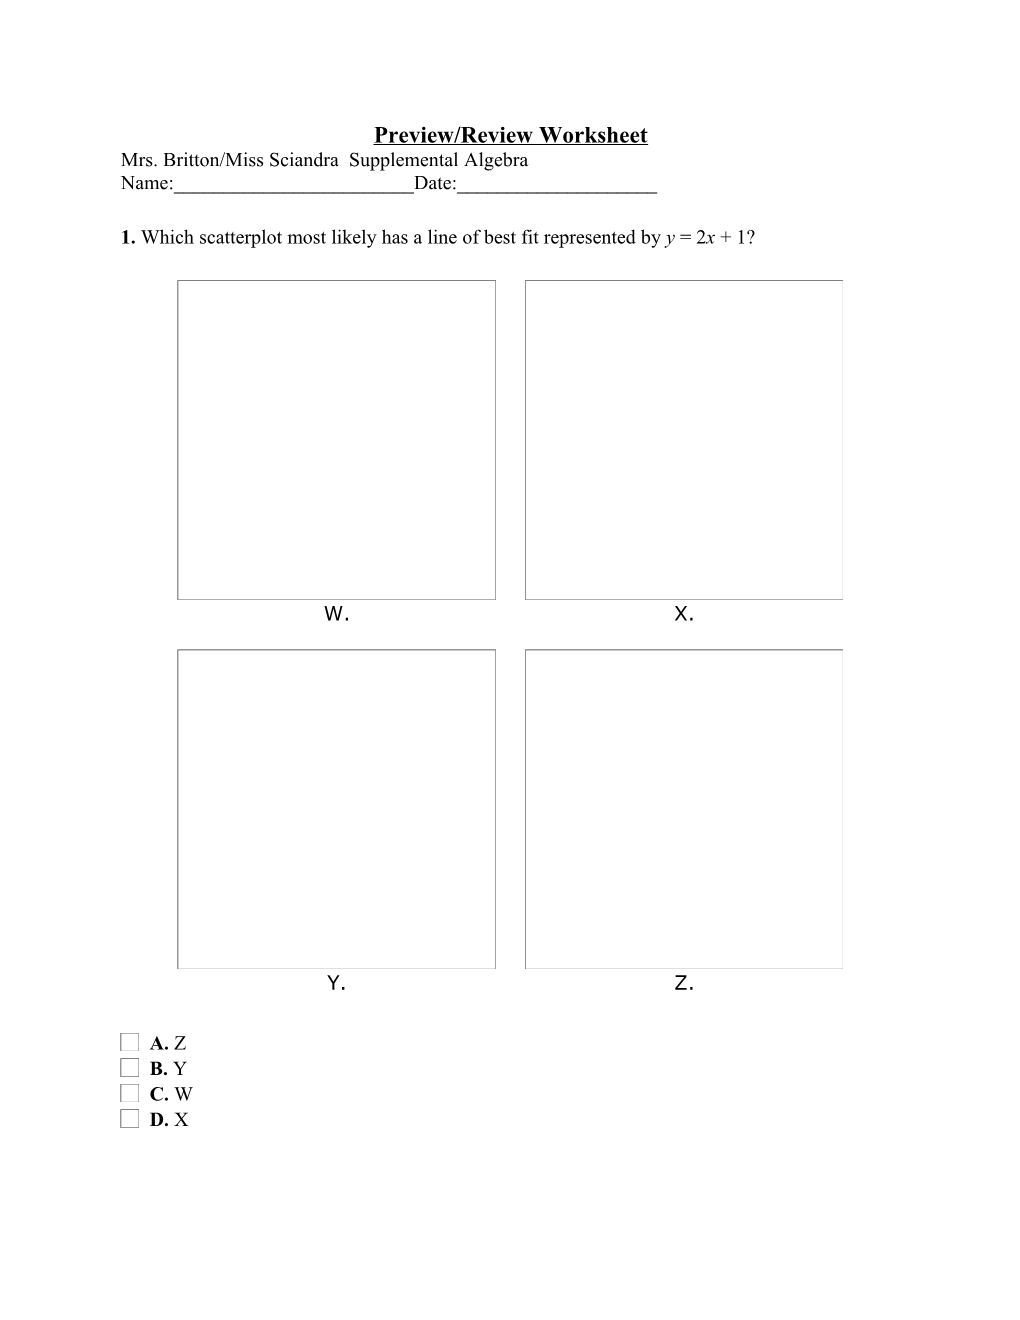 Preview/Review Worksheet